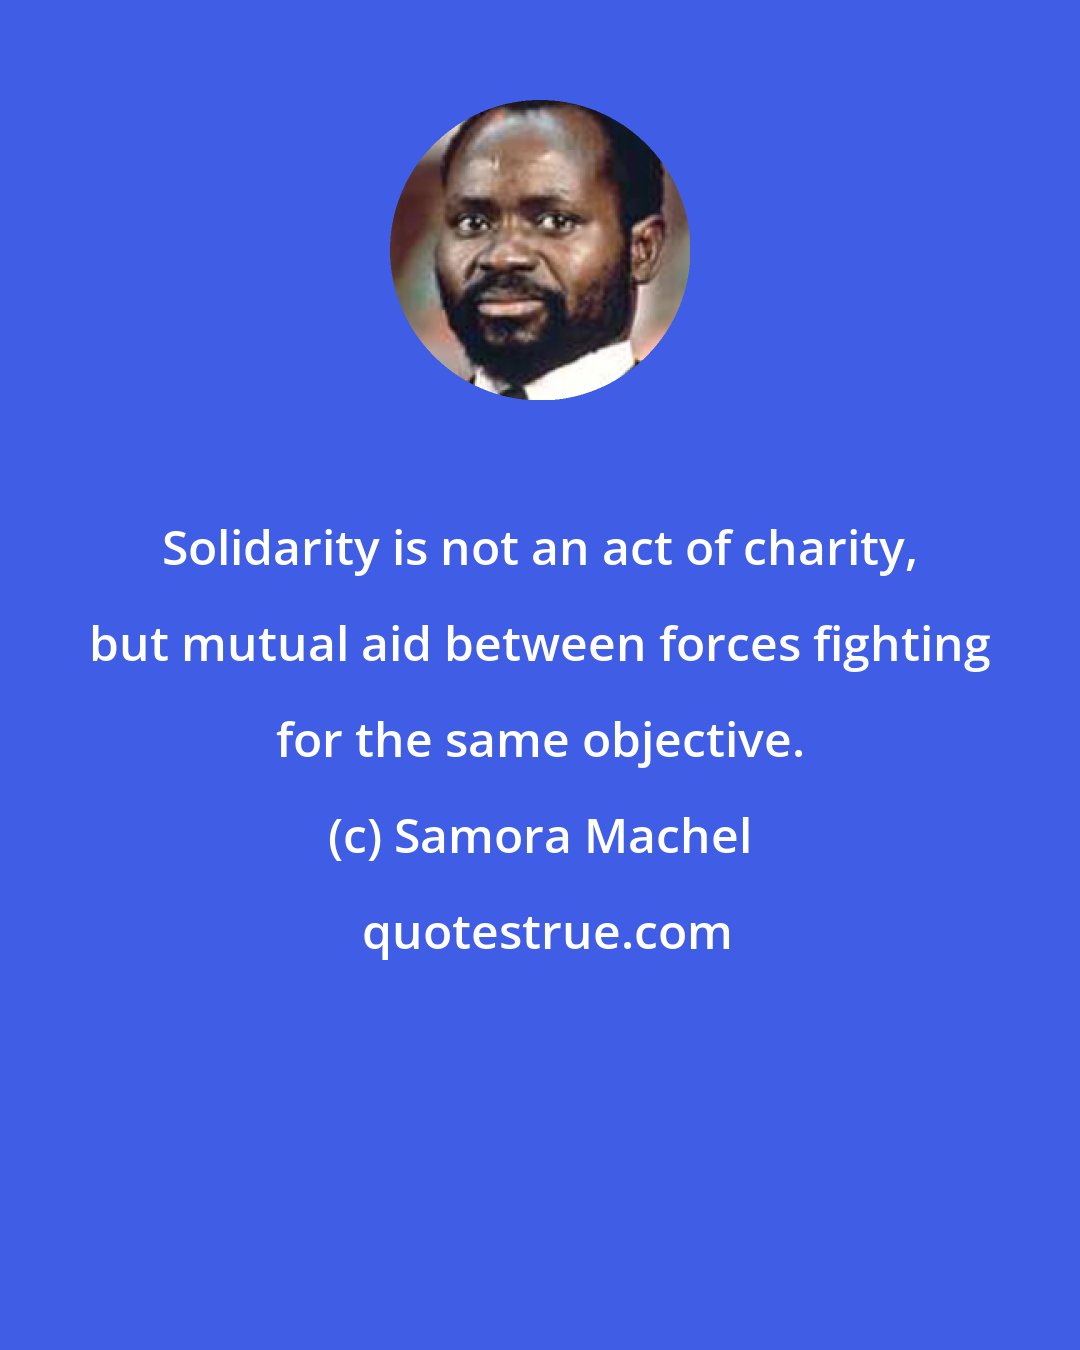 Samora Machel: Solidarity is not an act of charity, but mutual aid between forces fighting for the same objective.